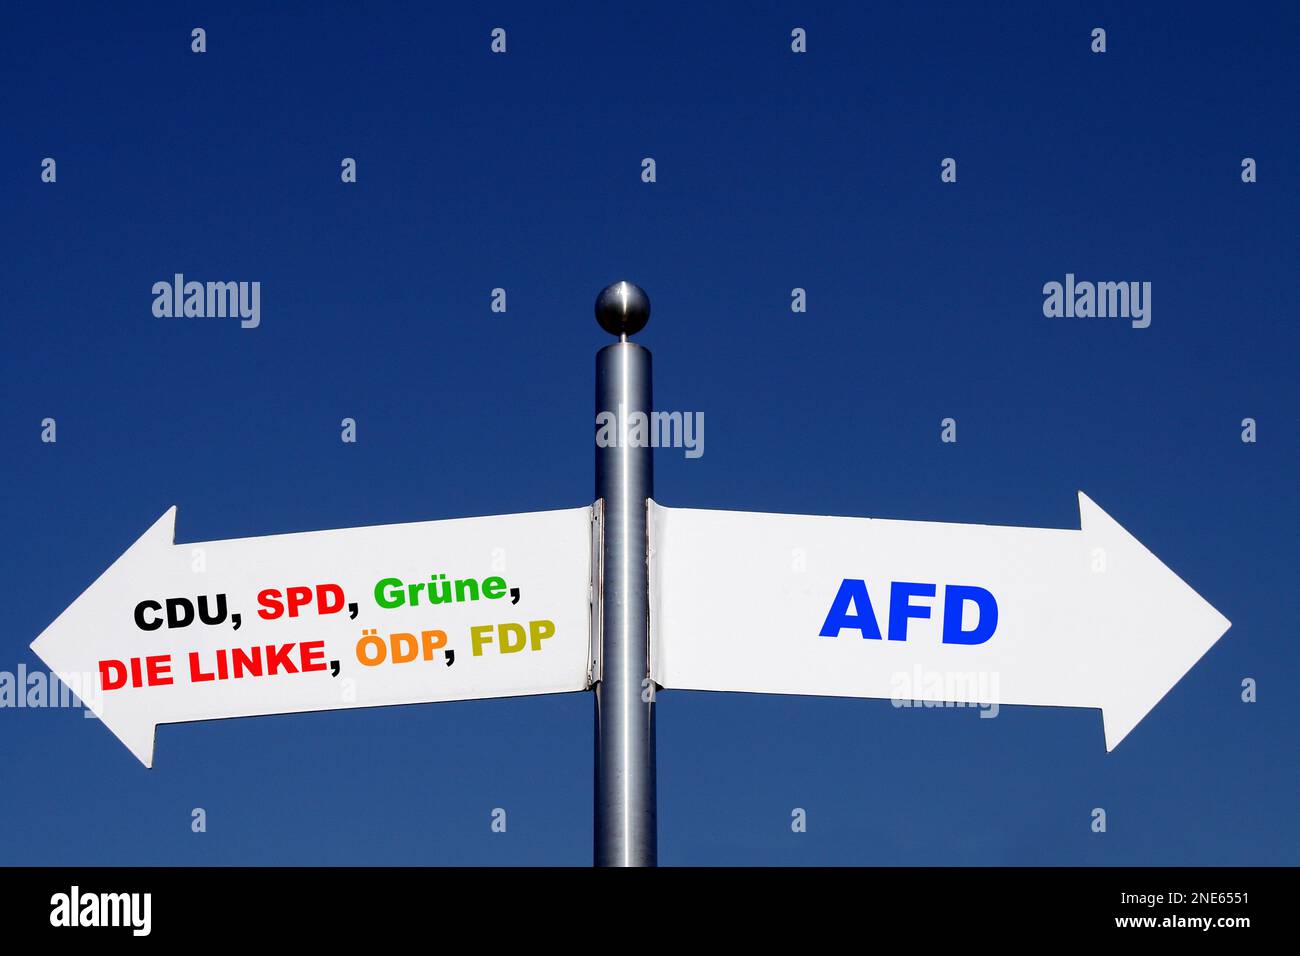 signposts pointing in different directions, options all oarties - AfD Stock Photo